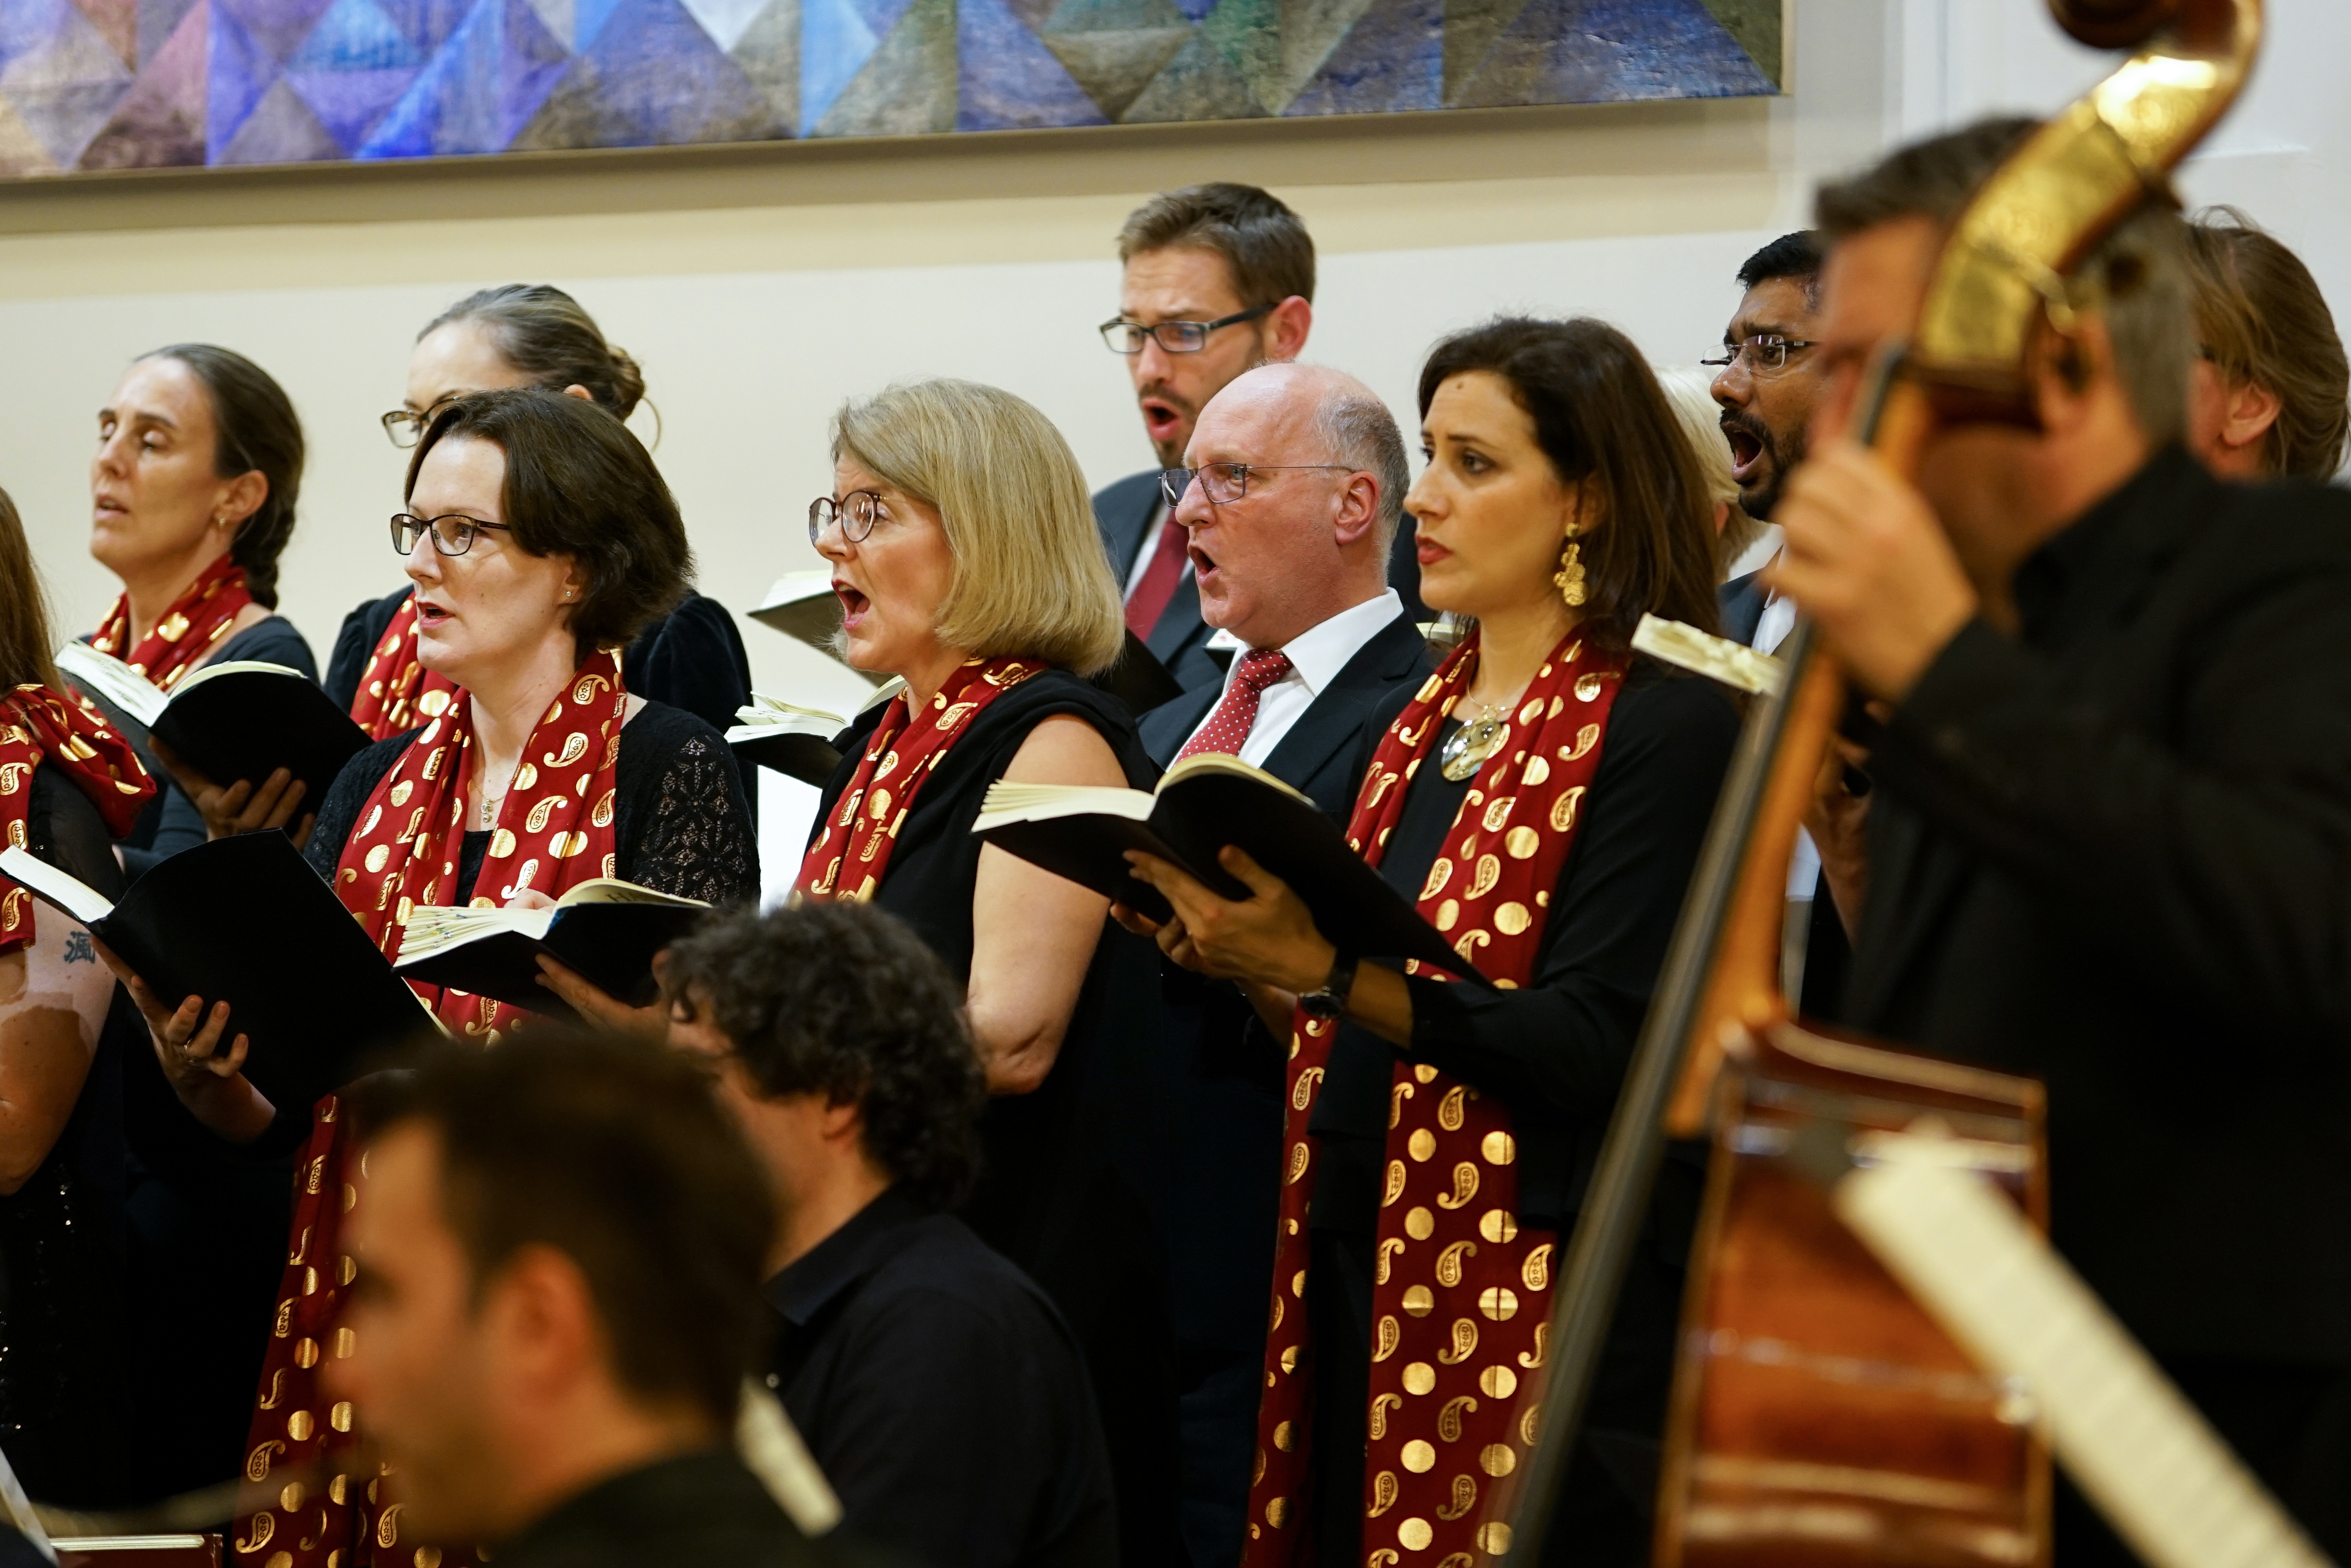 Qatar Concert Choir performing Handel with musicians from Qatar Philharmonic Orchestra